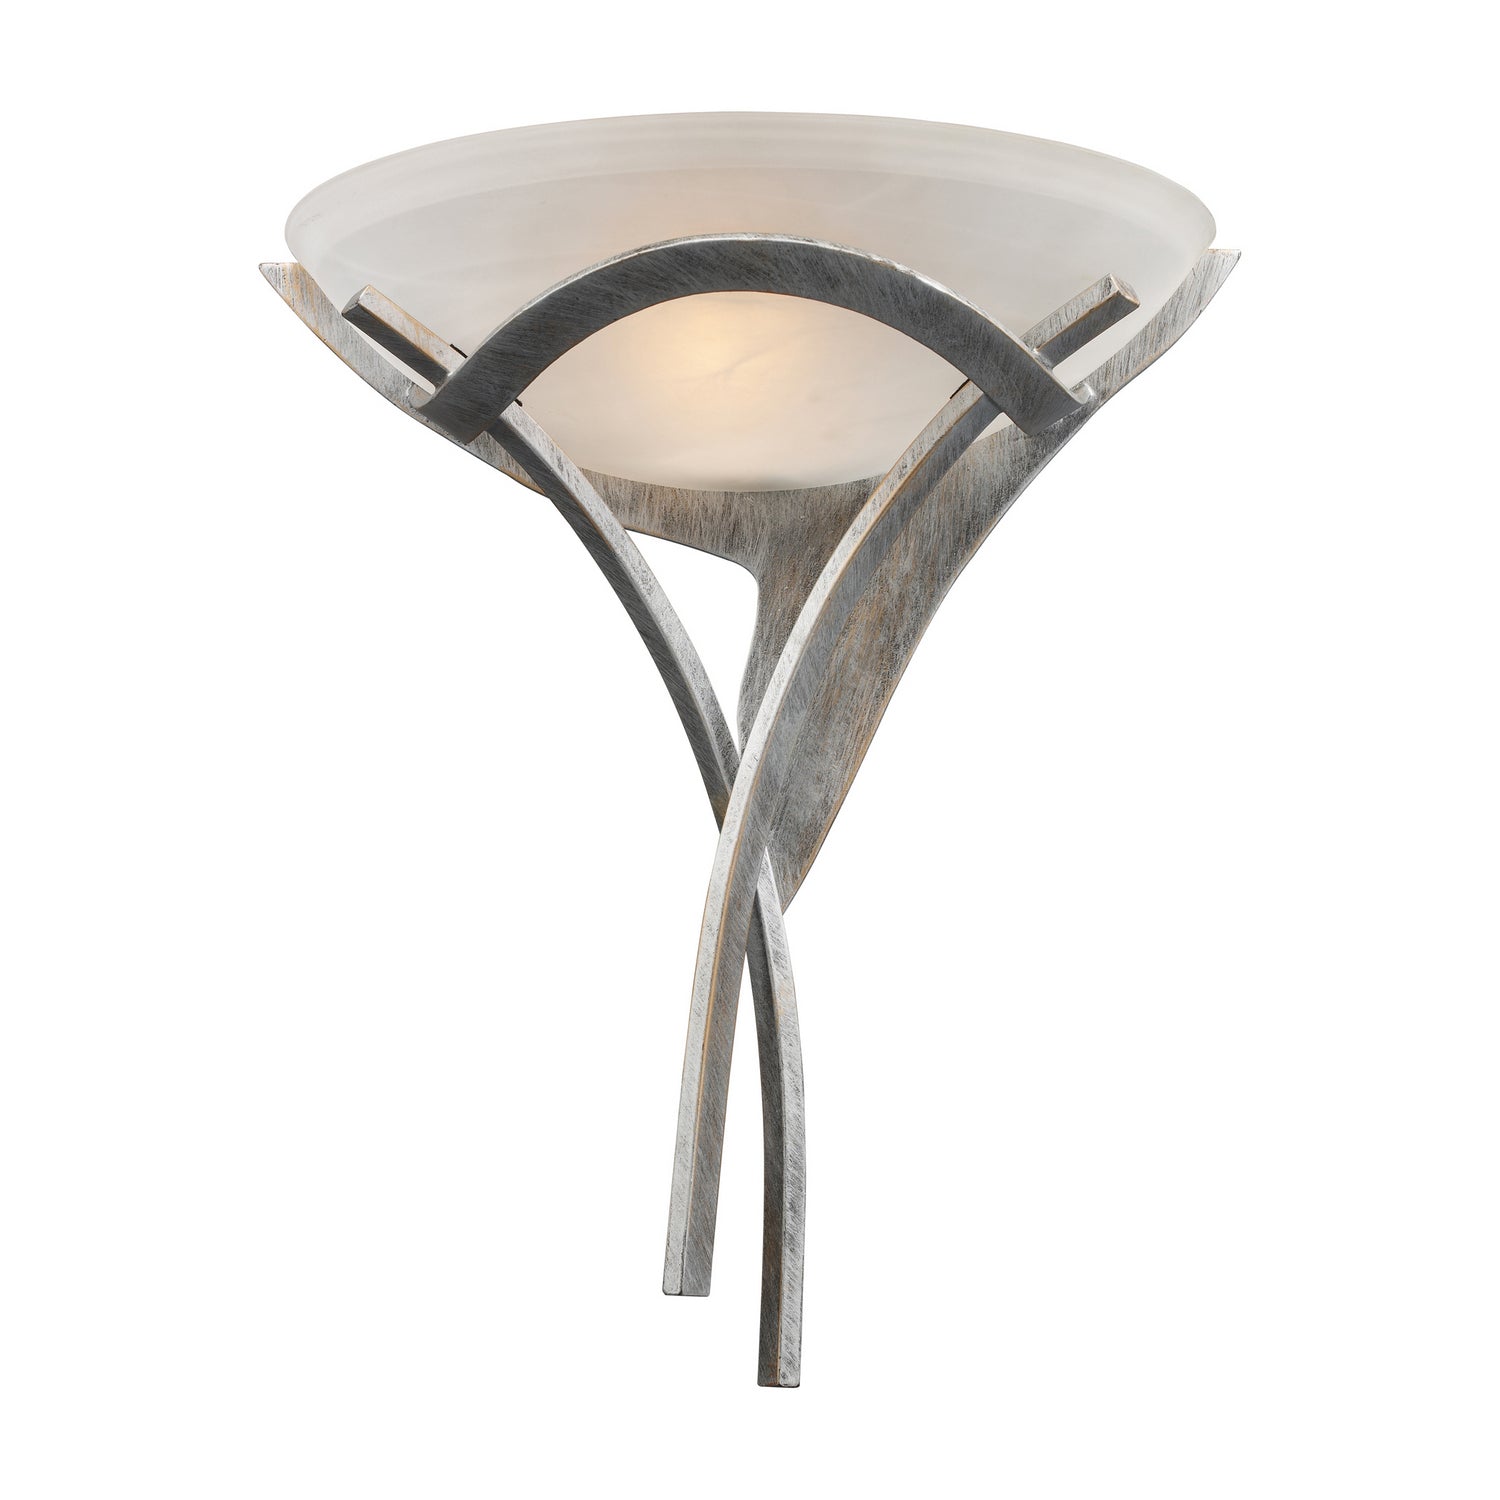 ELK Home - 001-TS - One Light Wall Sconce - Aurora - Tarnished Silver